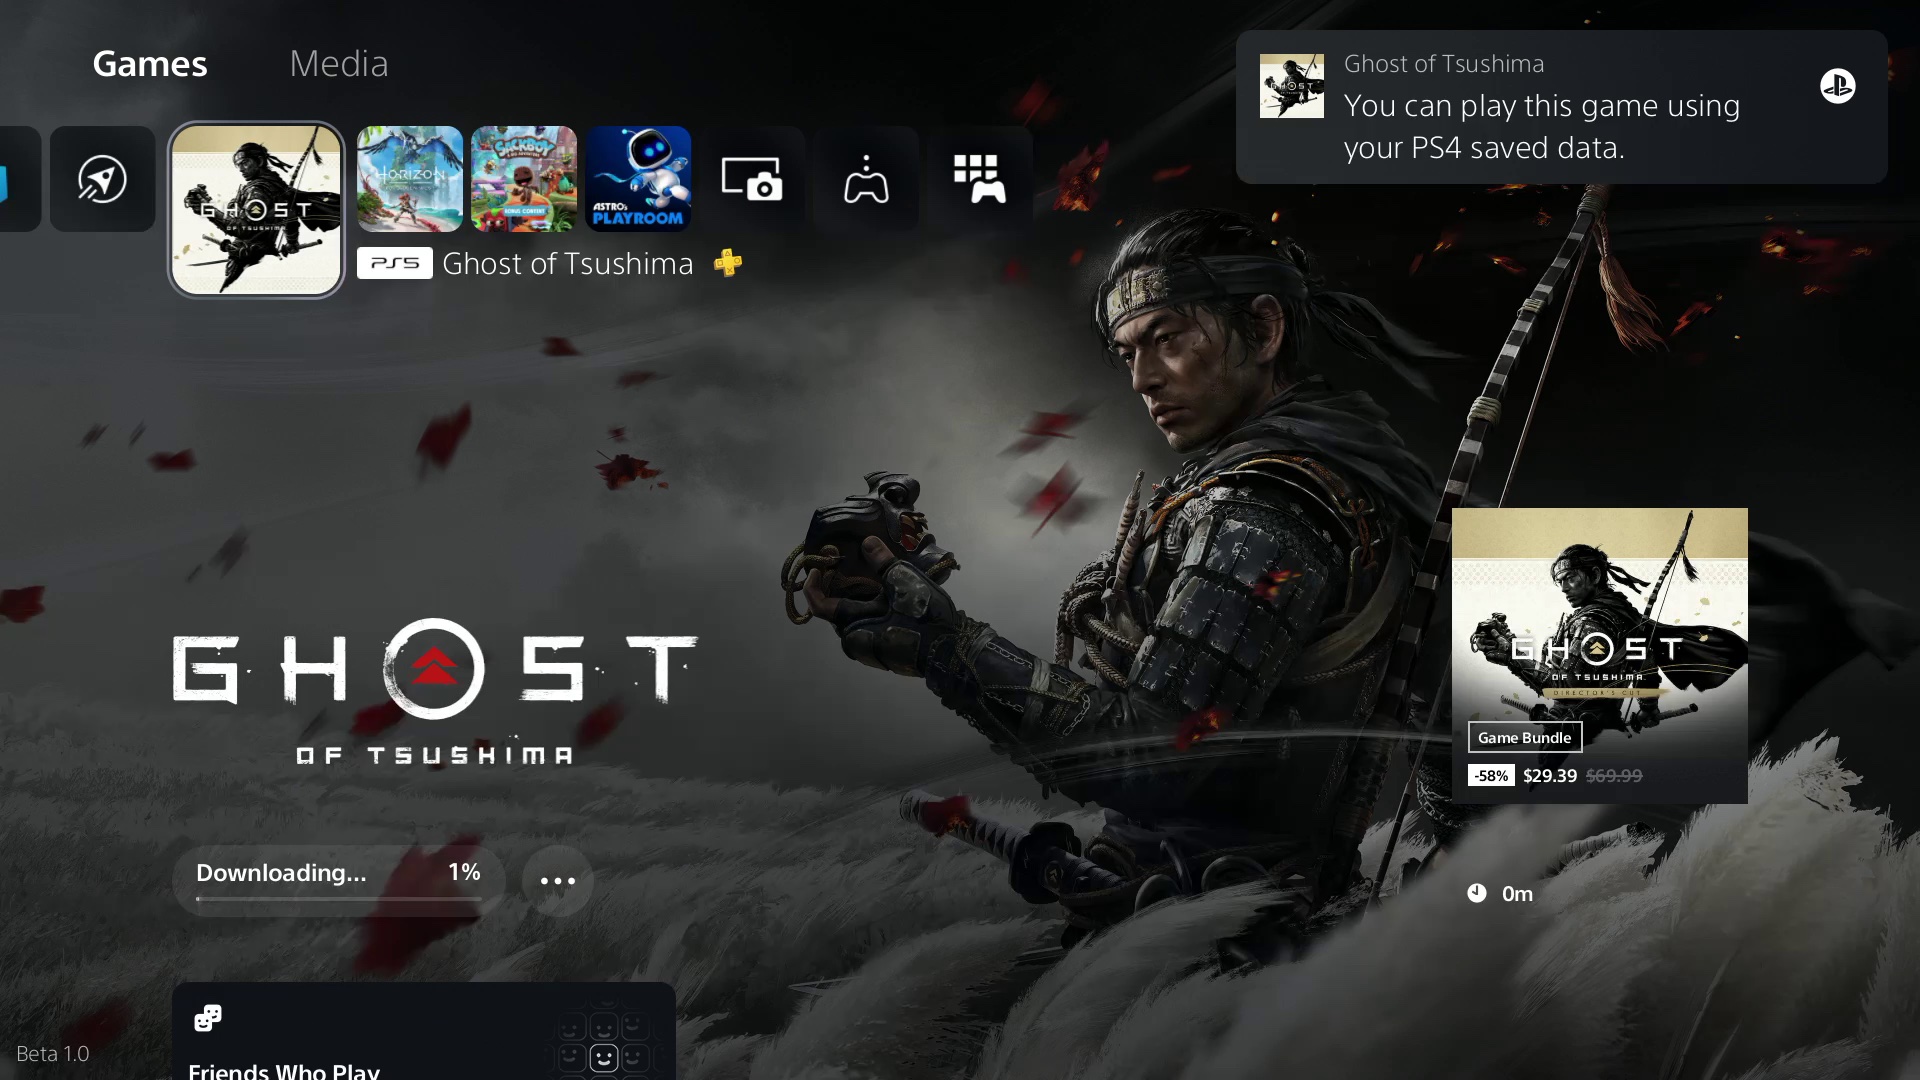  "PlayStation 5 UI screenshot showing the notification that PS4 saved data for Ghost of Tsushima is available to download"